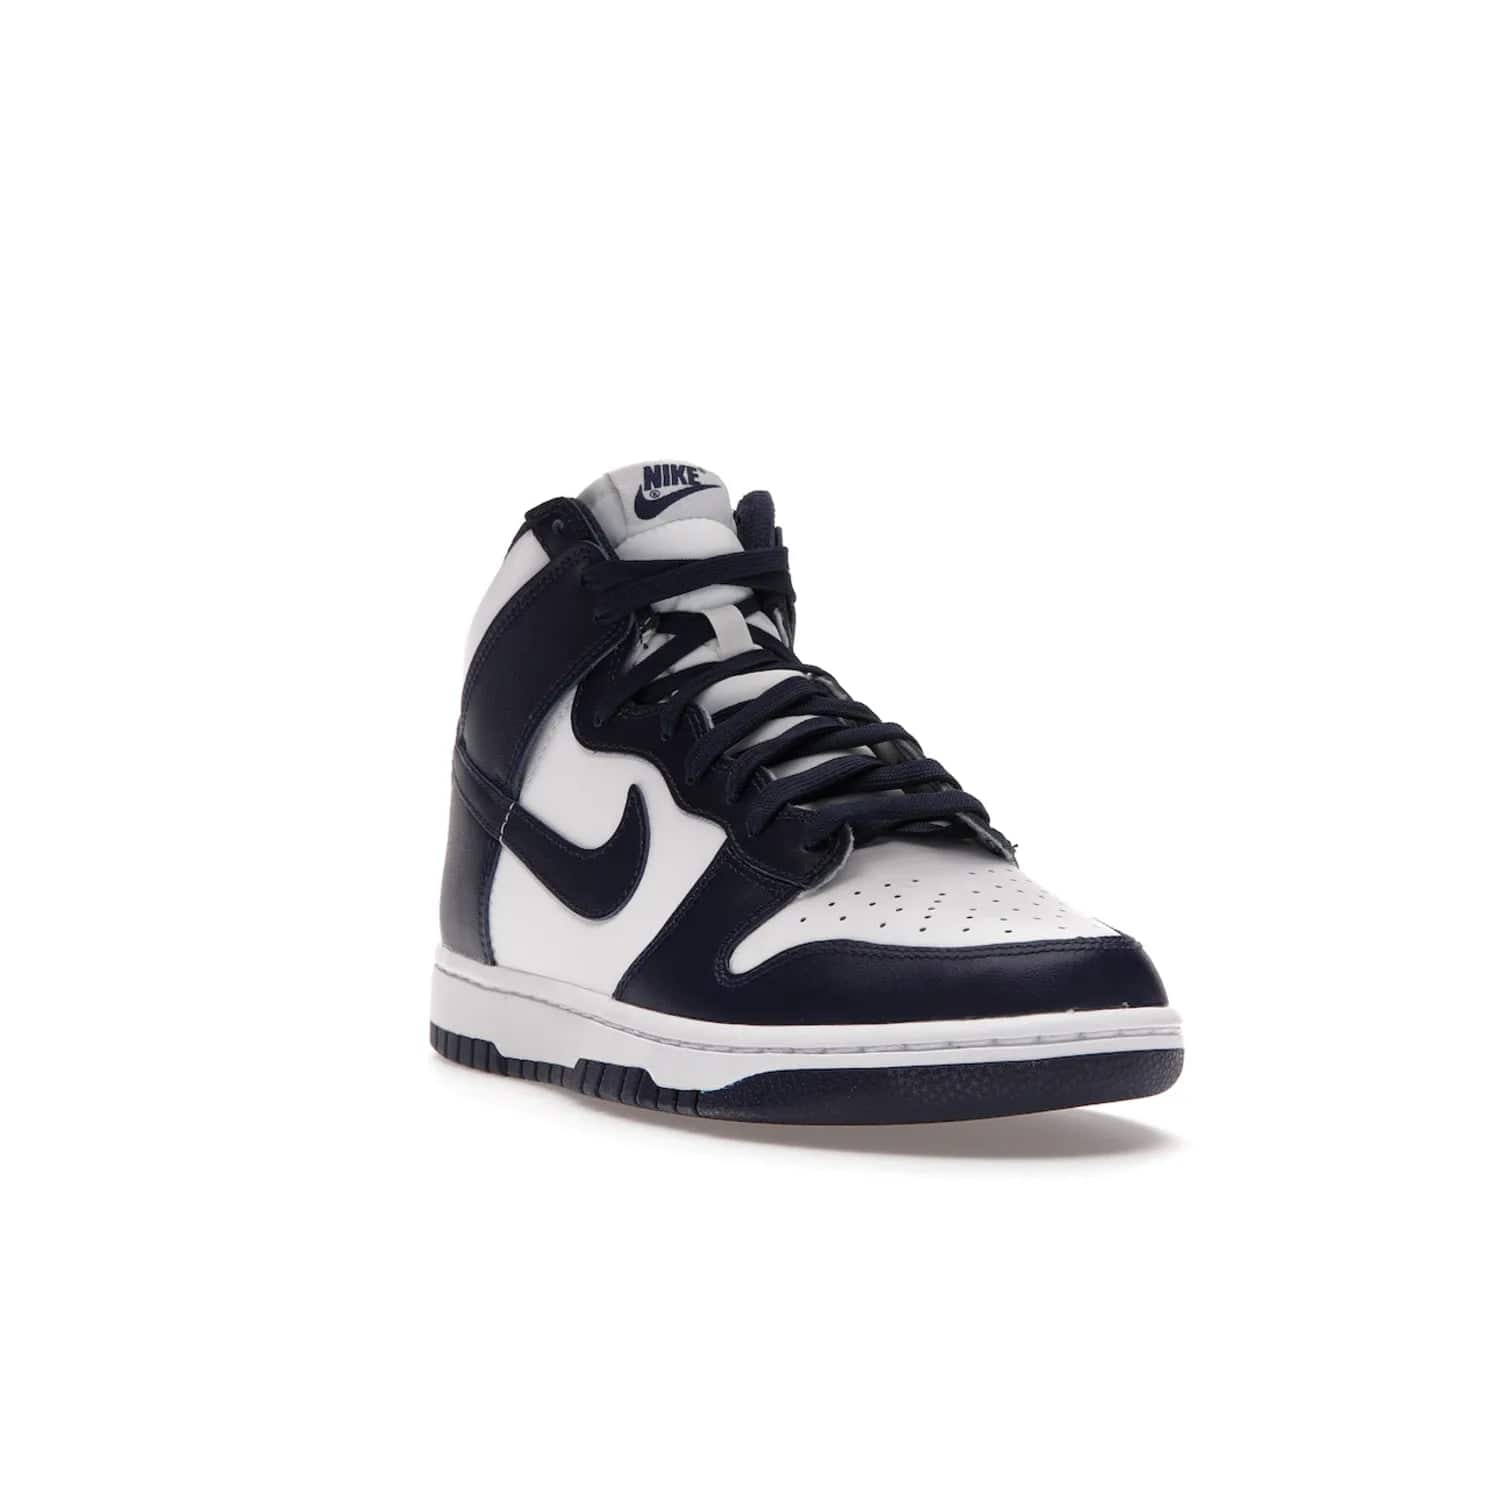 Nike Dunk High Championship Navy - Image 7 - Only at www.BallersClubKickz.com - Classic athletic style meets striking color-blocking on the Nike Dunk High Championship Navy. A white leather upper with Championship Navy overlays creates a retro look with a woven tongue label and sole. Unleash your inner champion with the Nike Dunk High Championship Navy.